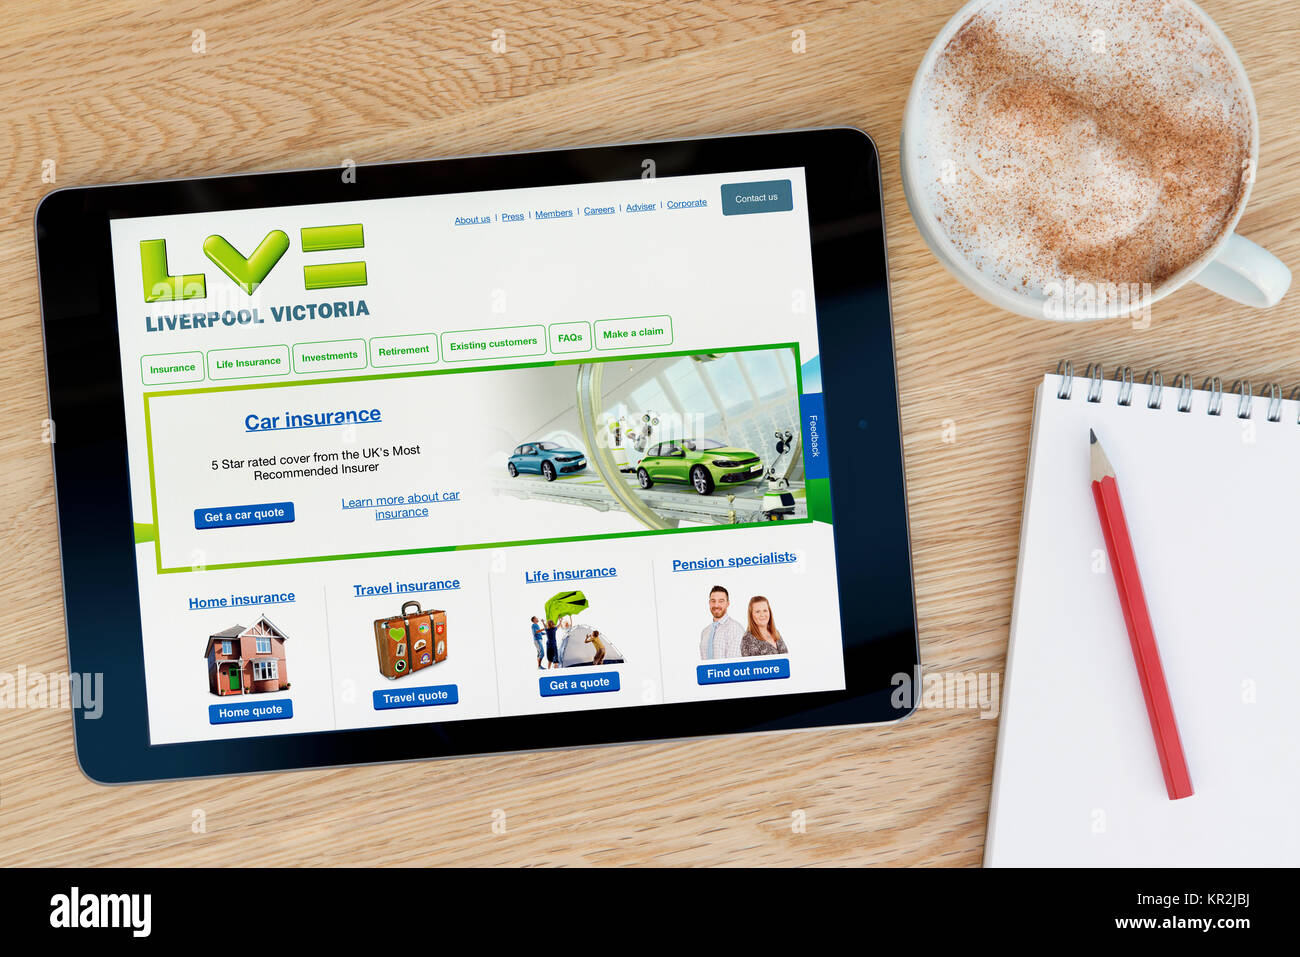 The Liverpool Victoria website on an iPad tablet device which rests on a wooden table beside a notepad and pencil and a cup of coffee (Editorial only) Stock Photo